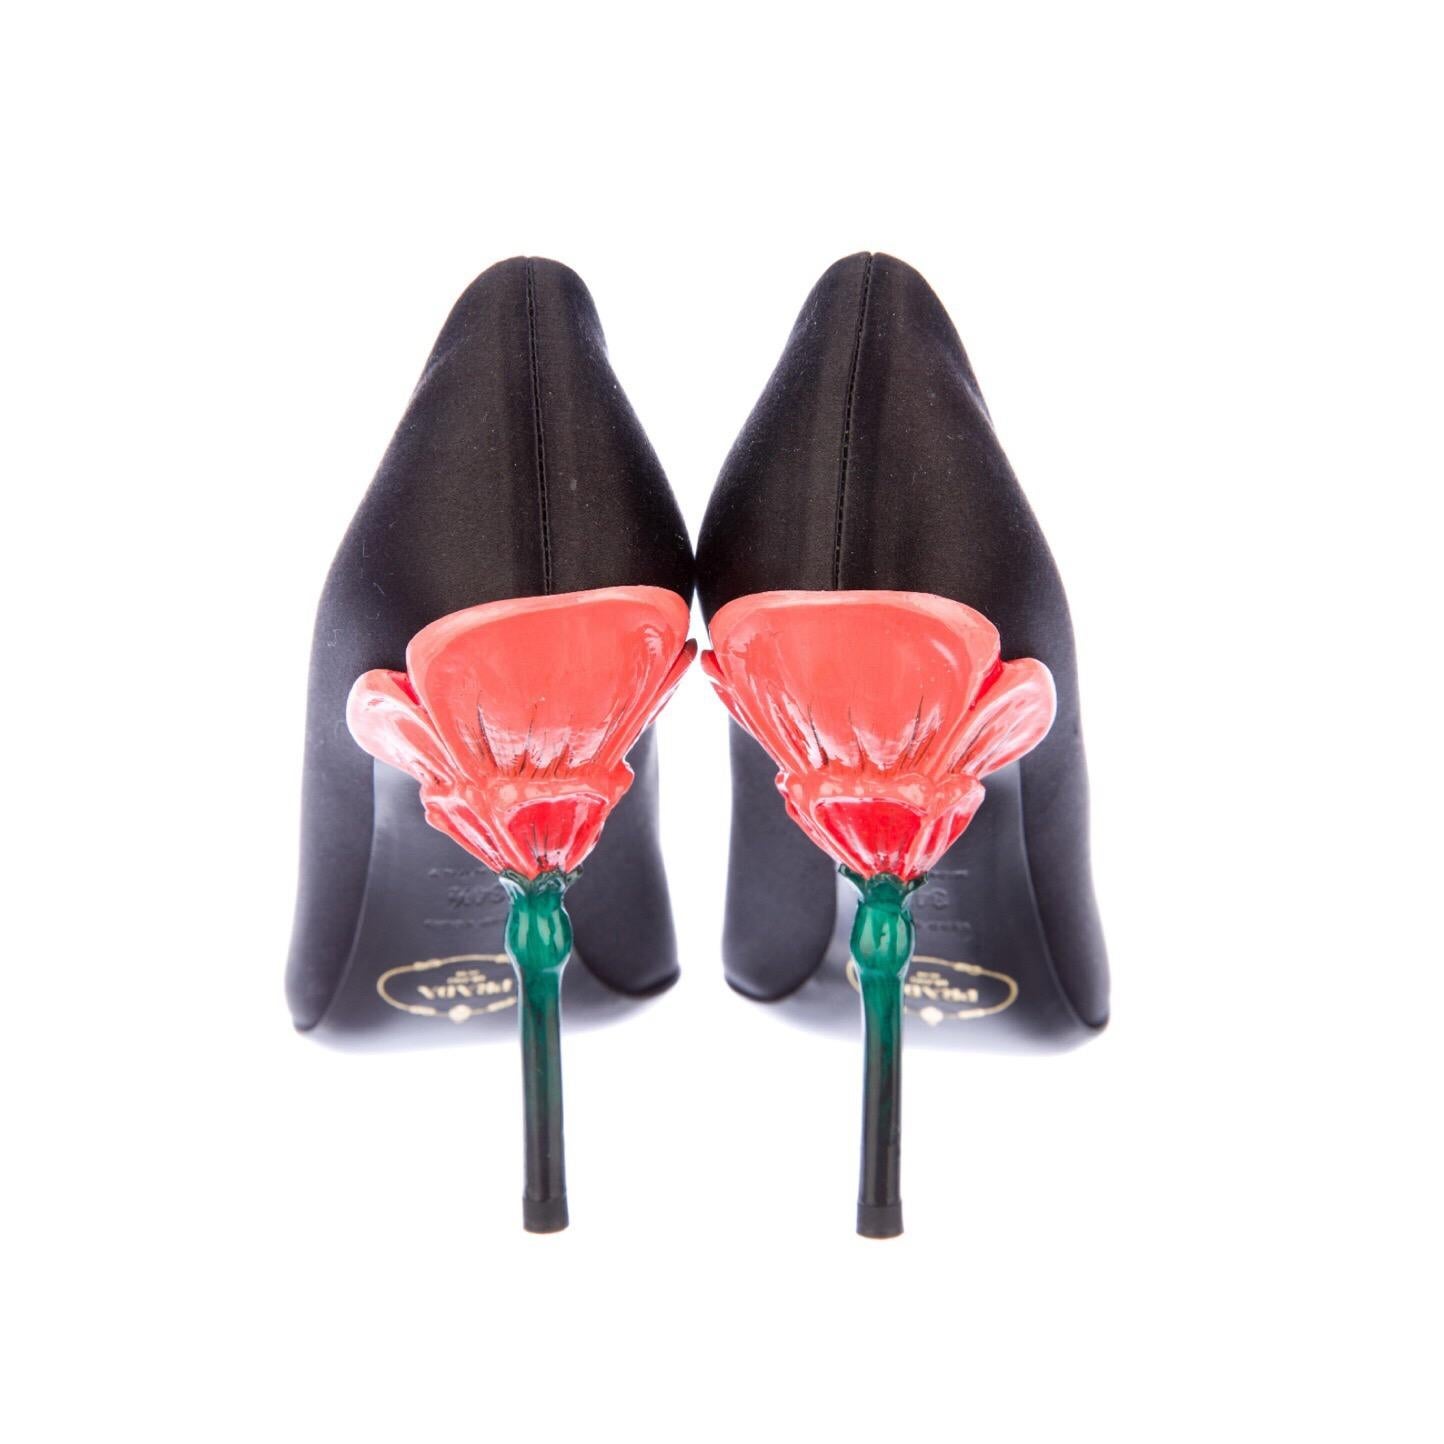 Prada Fairy Collection Black Raso Chic Pumps.
Done in silk satin with an open toe and a sculpted lacquered flower heel.
Size 4.5 U.S, 34.5 IT
- Follow us on Instagram @BASHAGOLD
